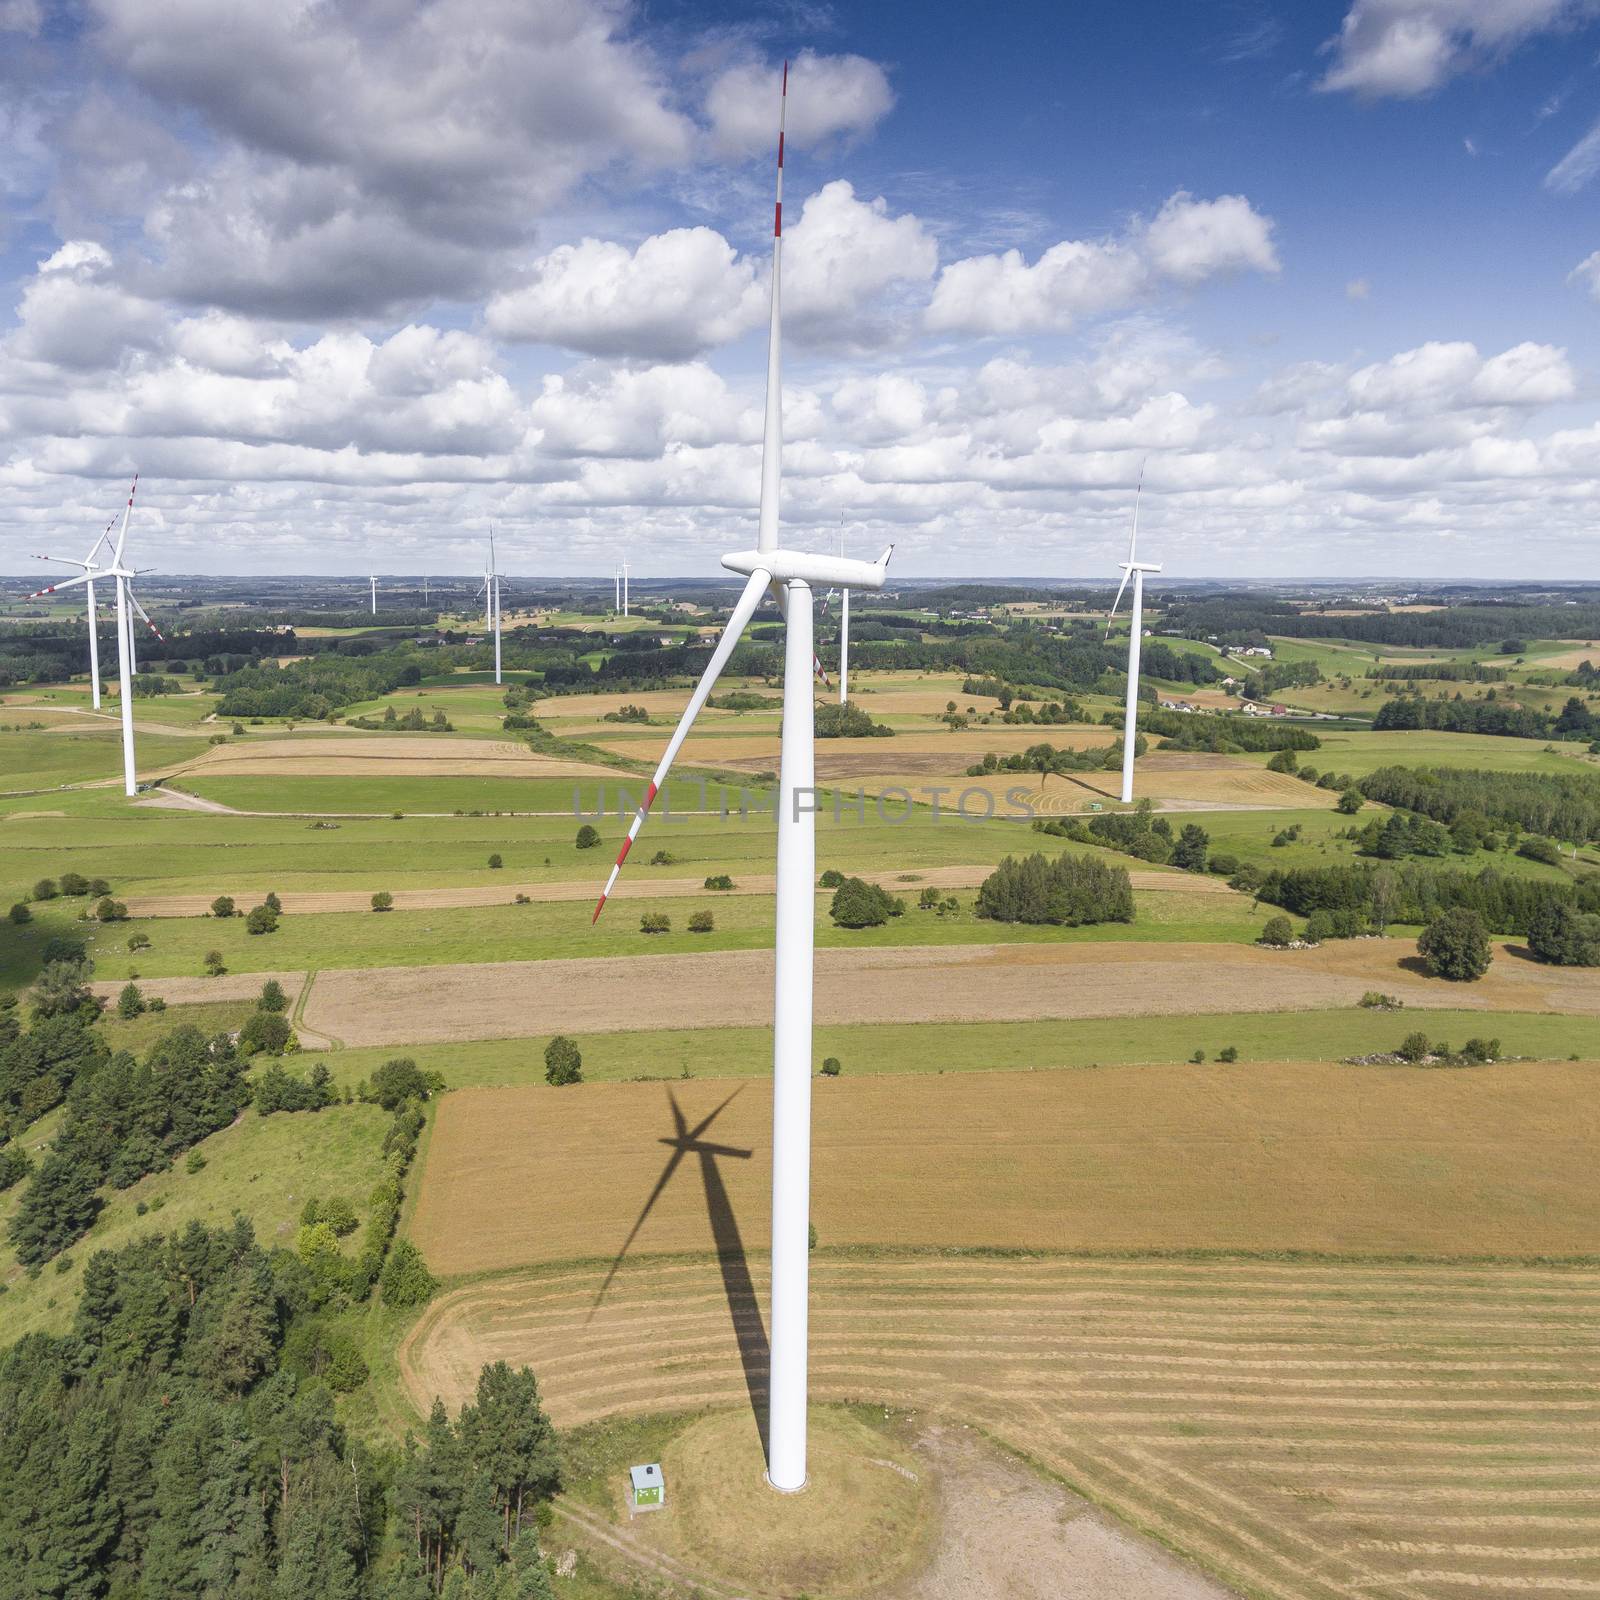 Wind turbines in Suwalki. Poland. View from above. Summer time. by mariusz_prusaczyk